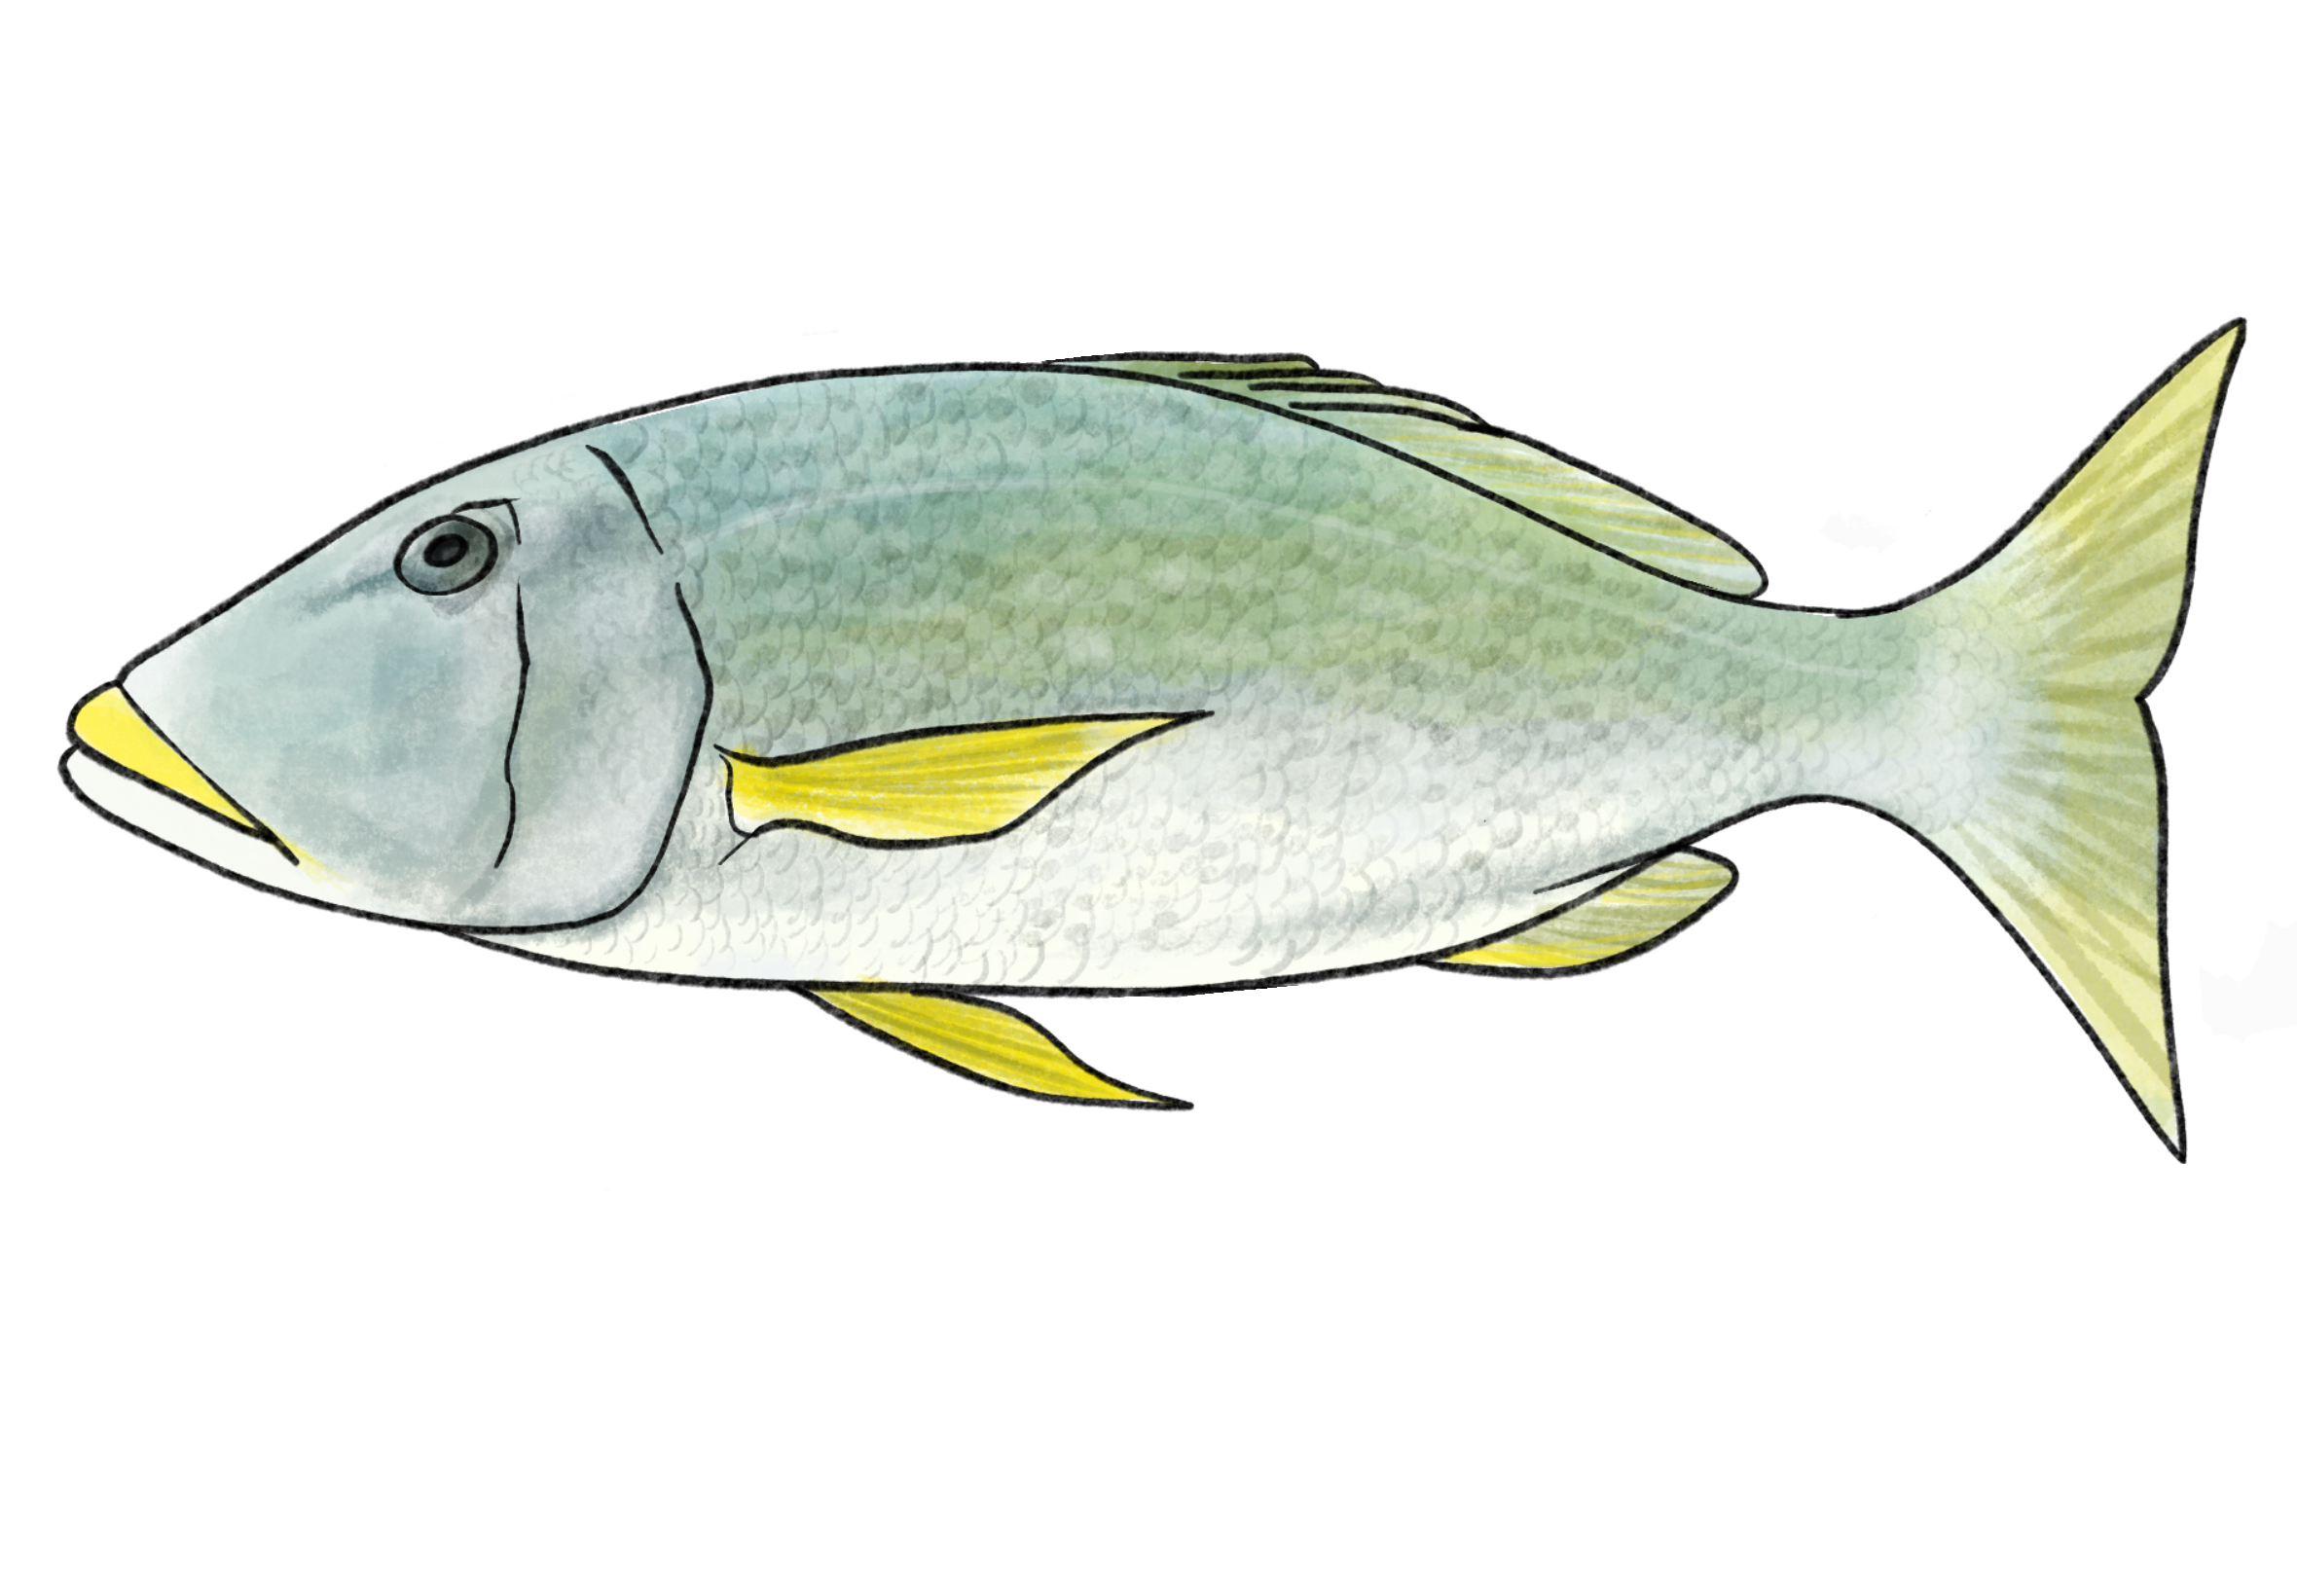 Yellow-lipped emperor fish - By Lilly Crosby